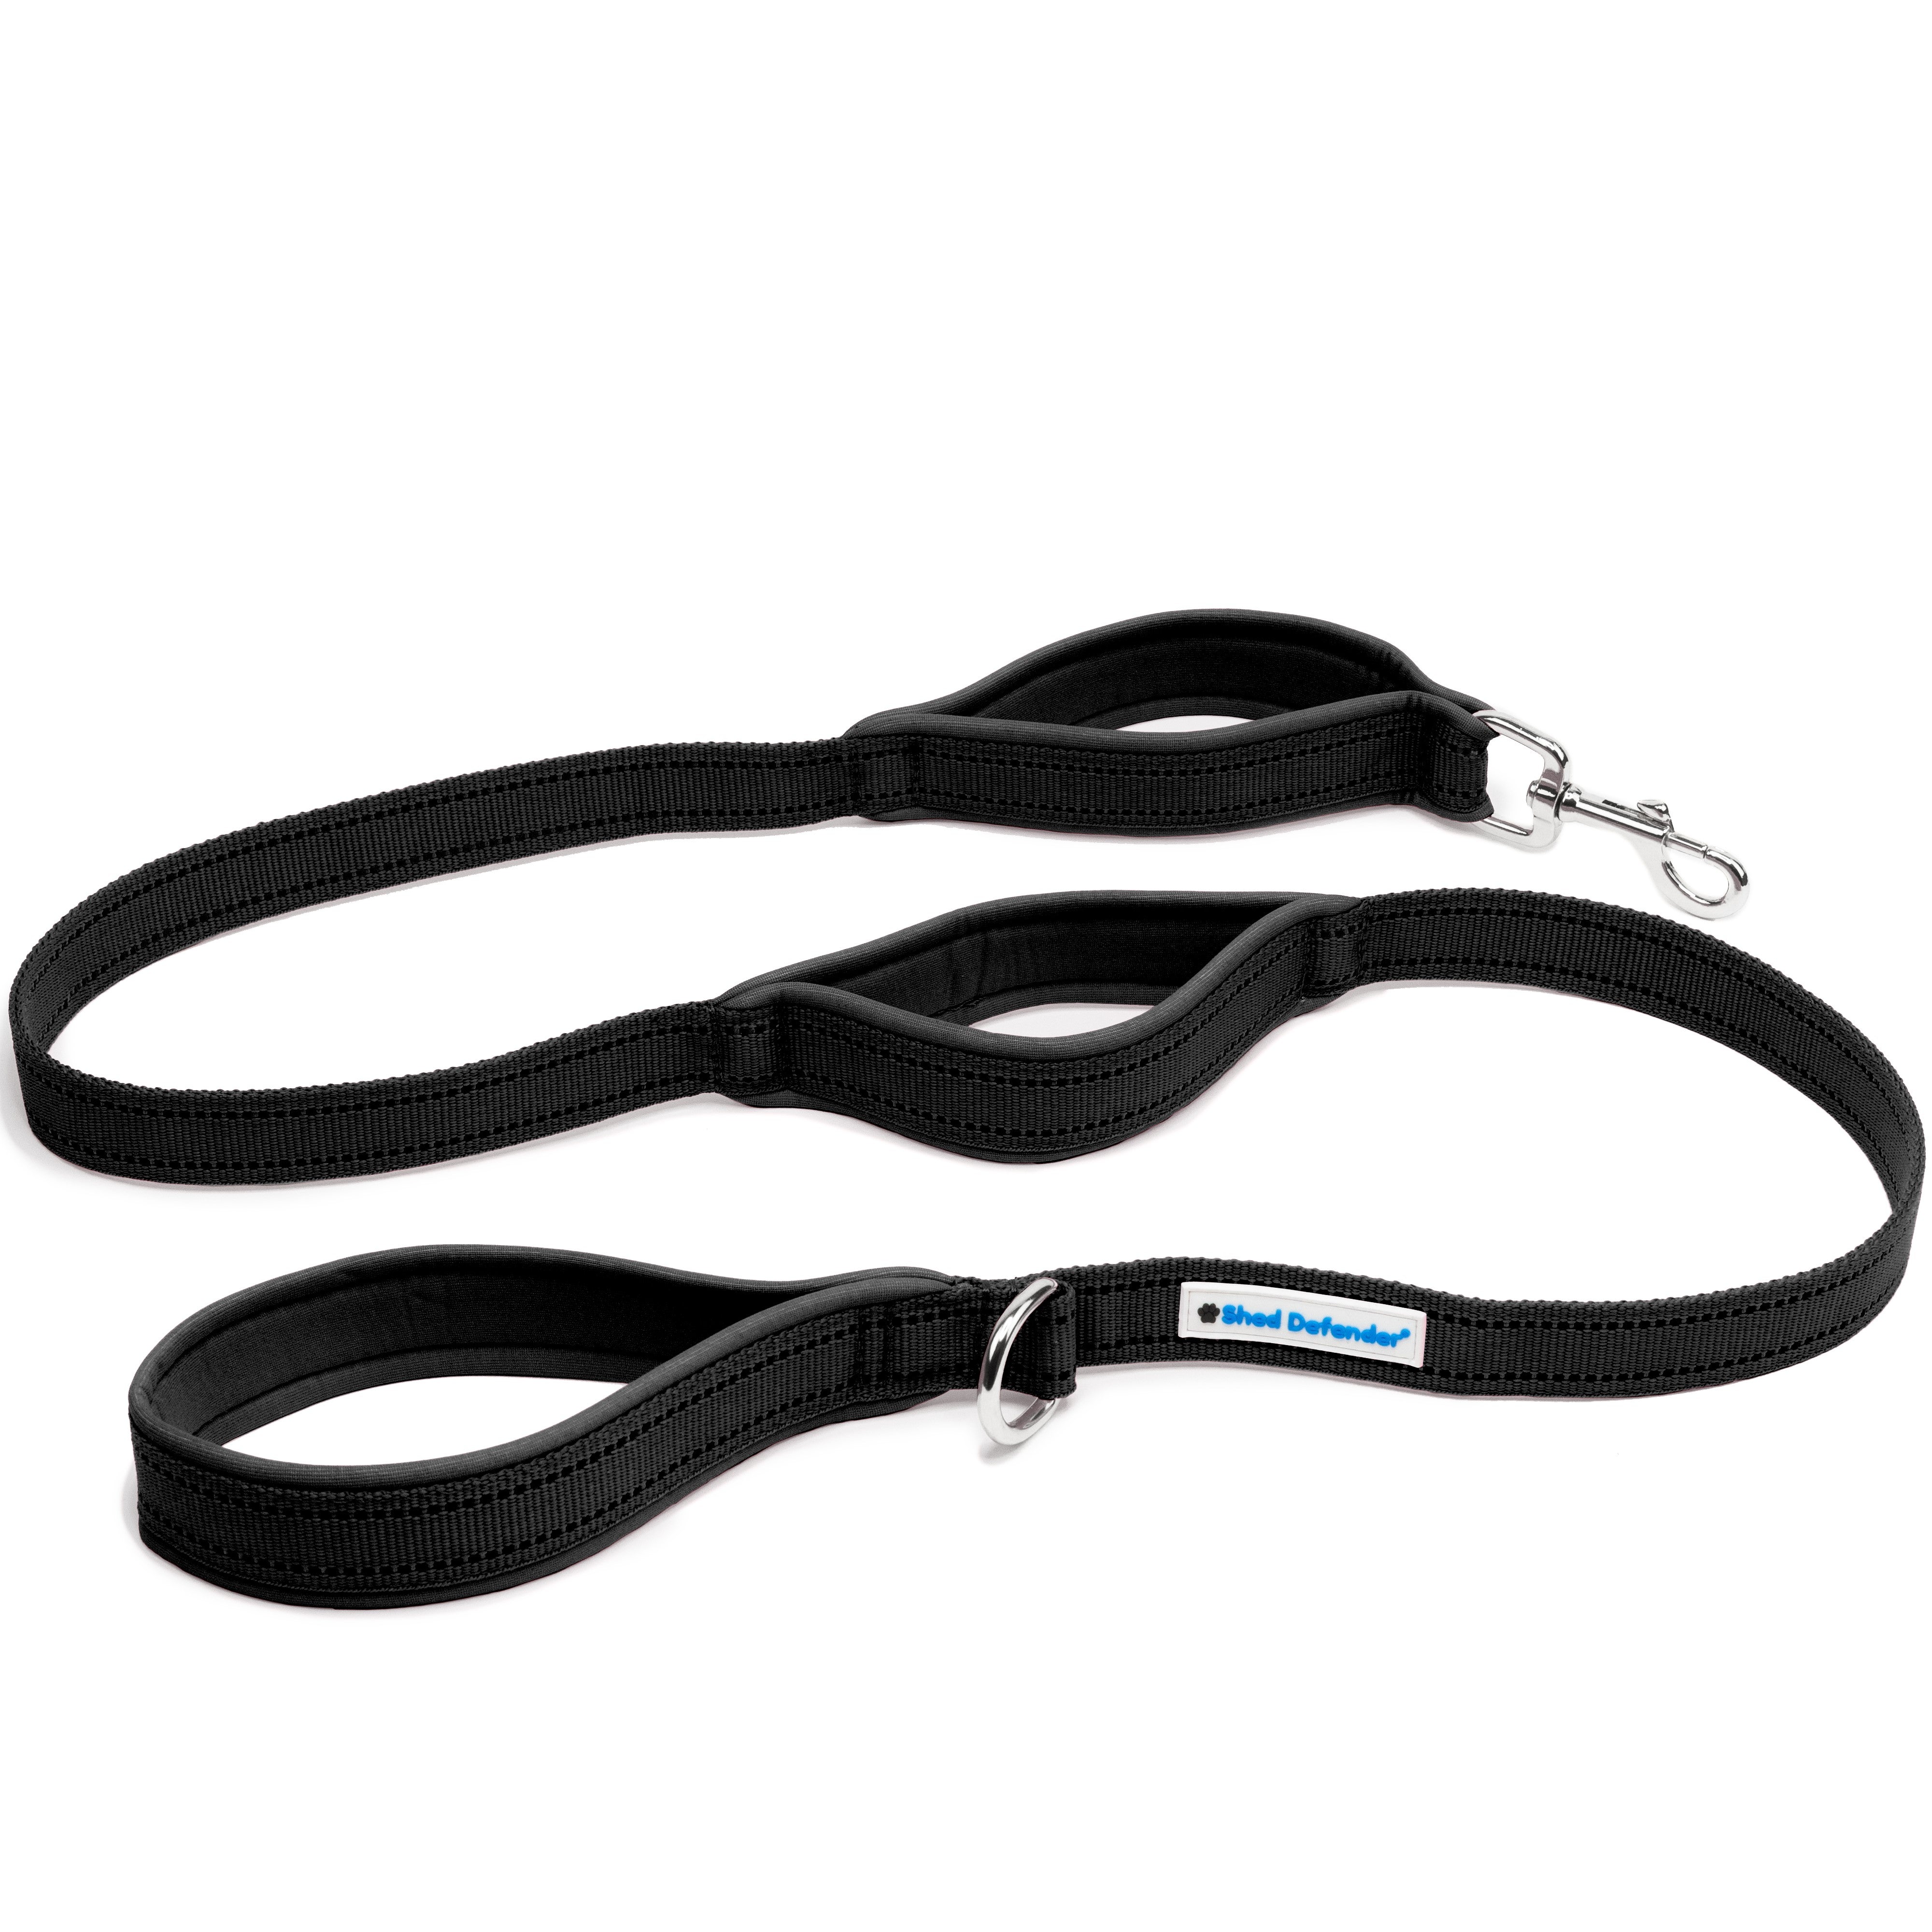 Shed Defender 5 ft. Standard Dog Leash - Three Padded Traffic Handles - Dual Layered Thickness - Black